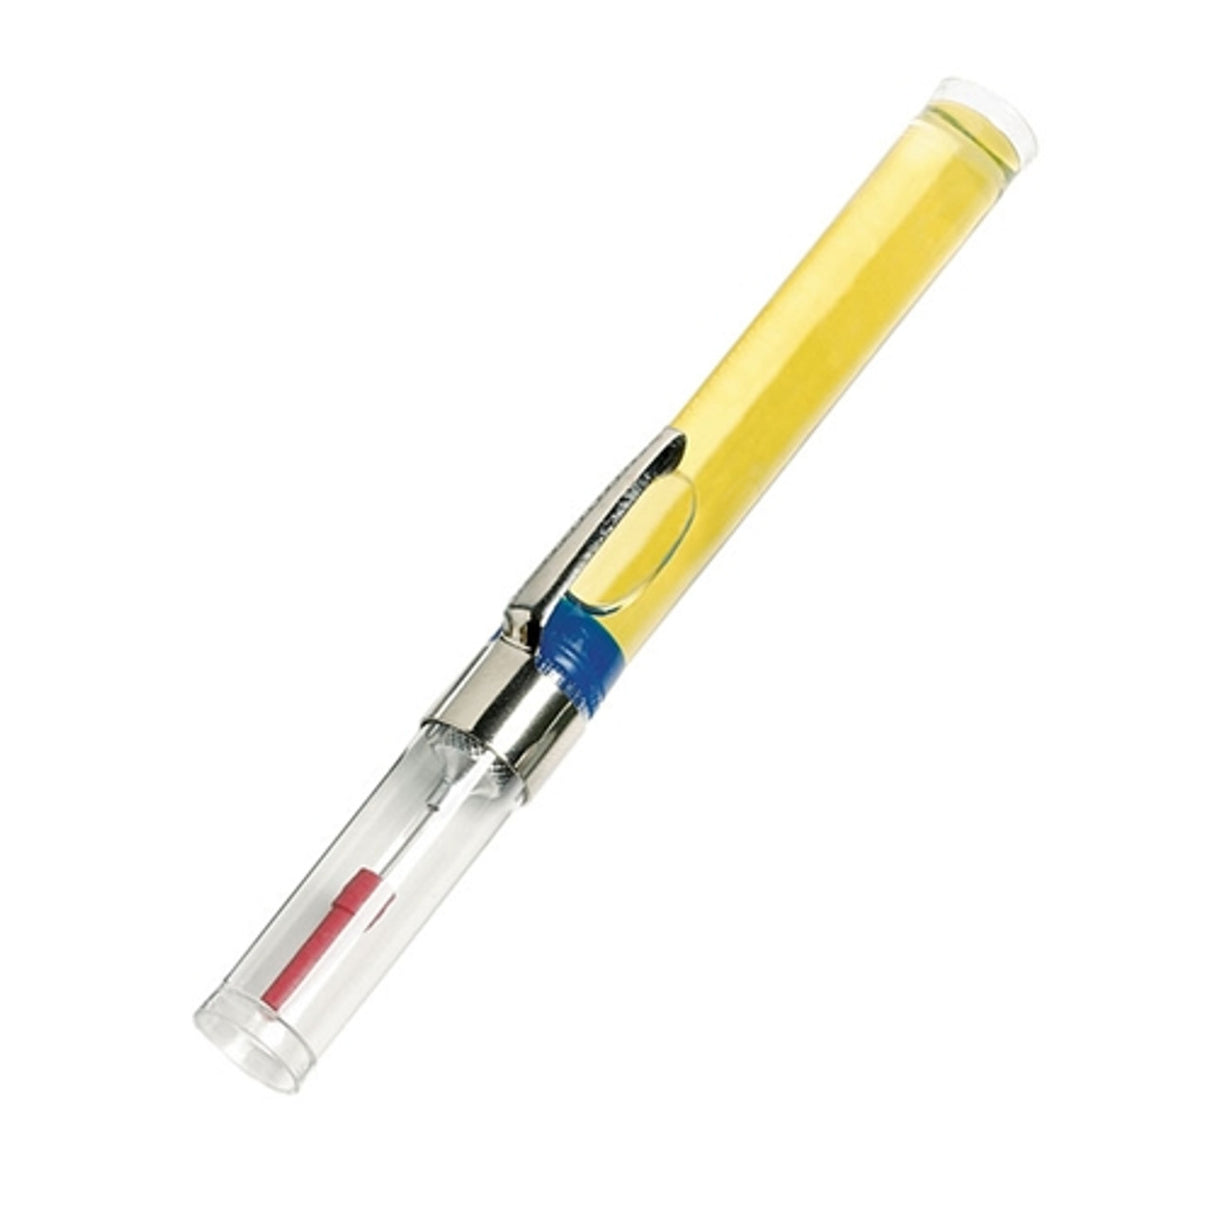 Handpiece Oil for Foredom® Flex Shafts - MS10005